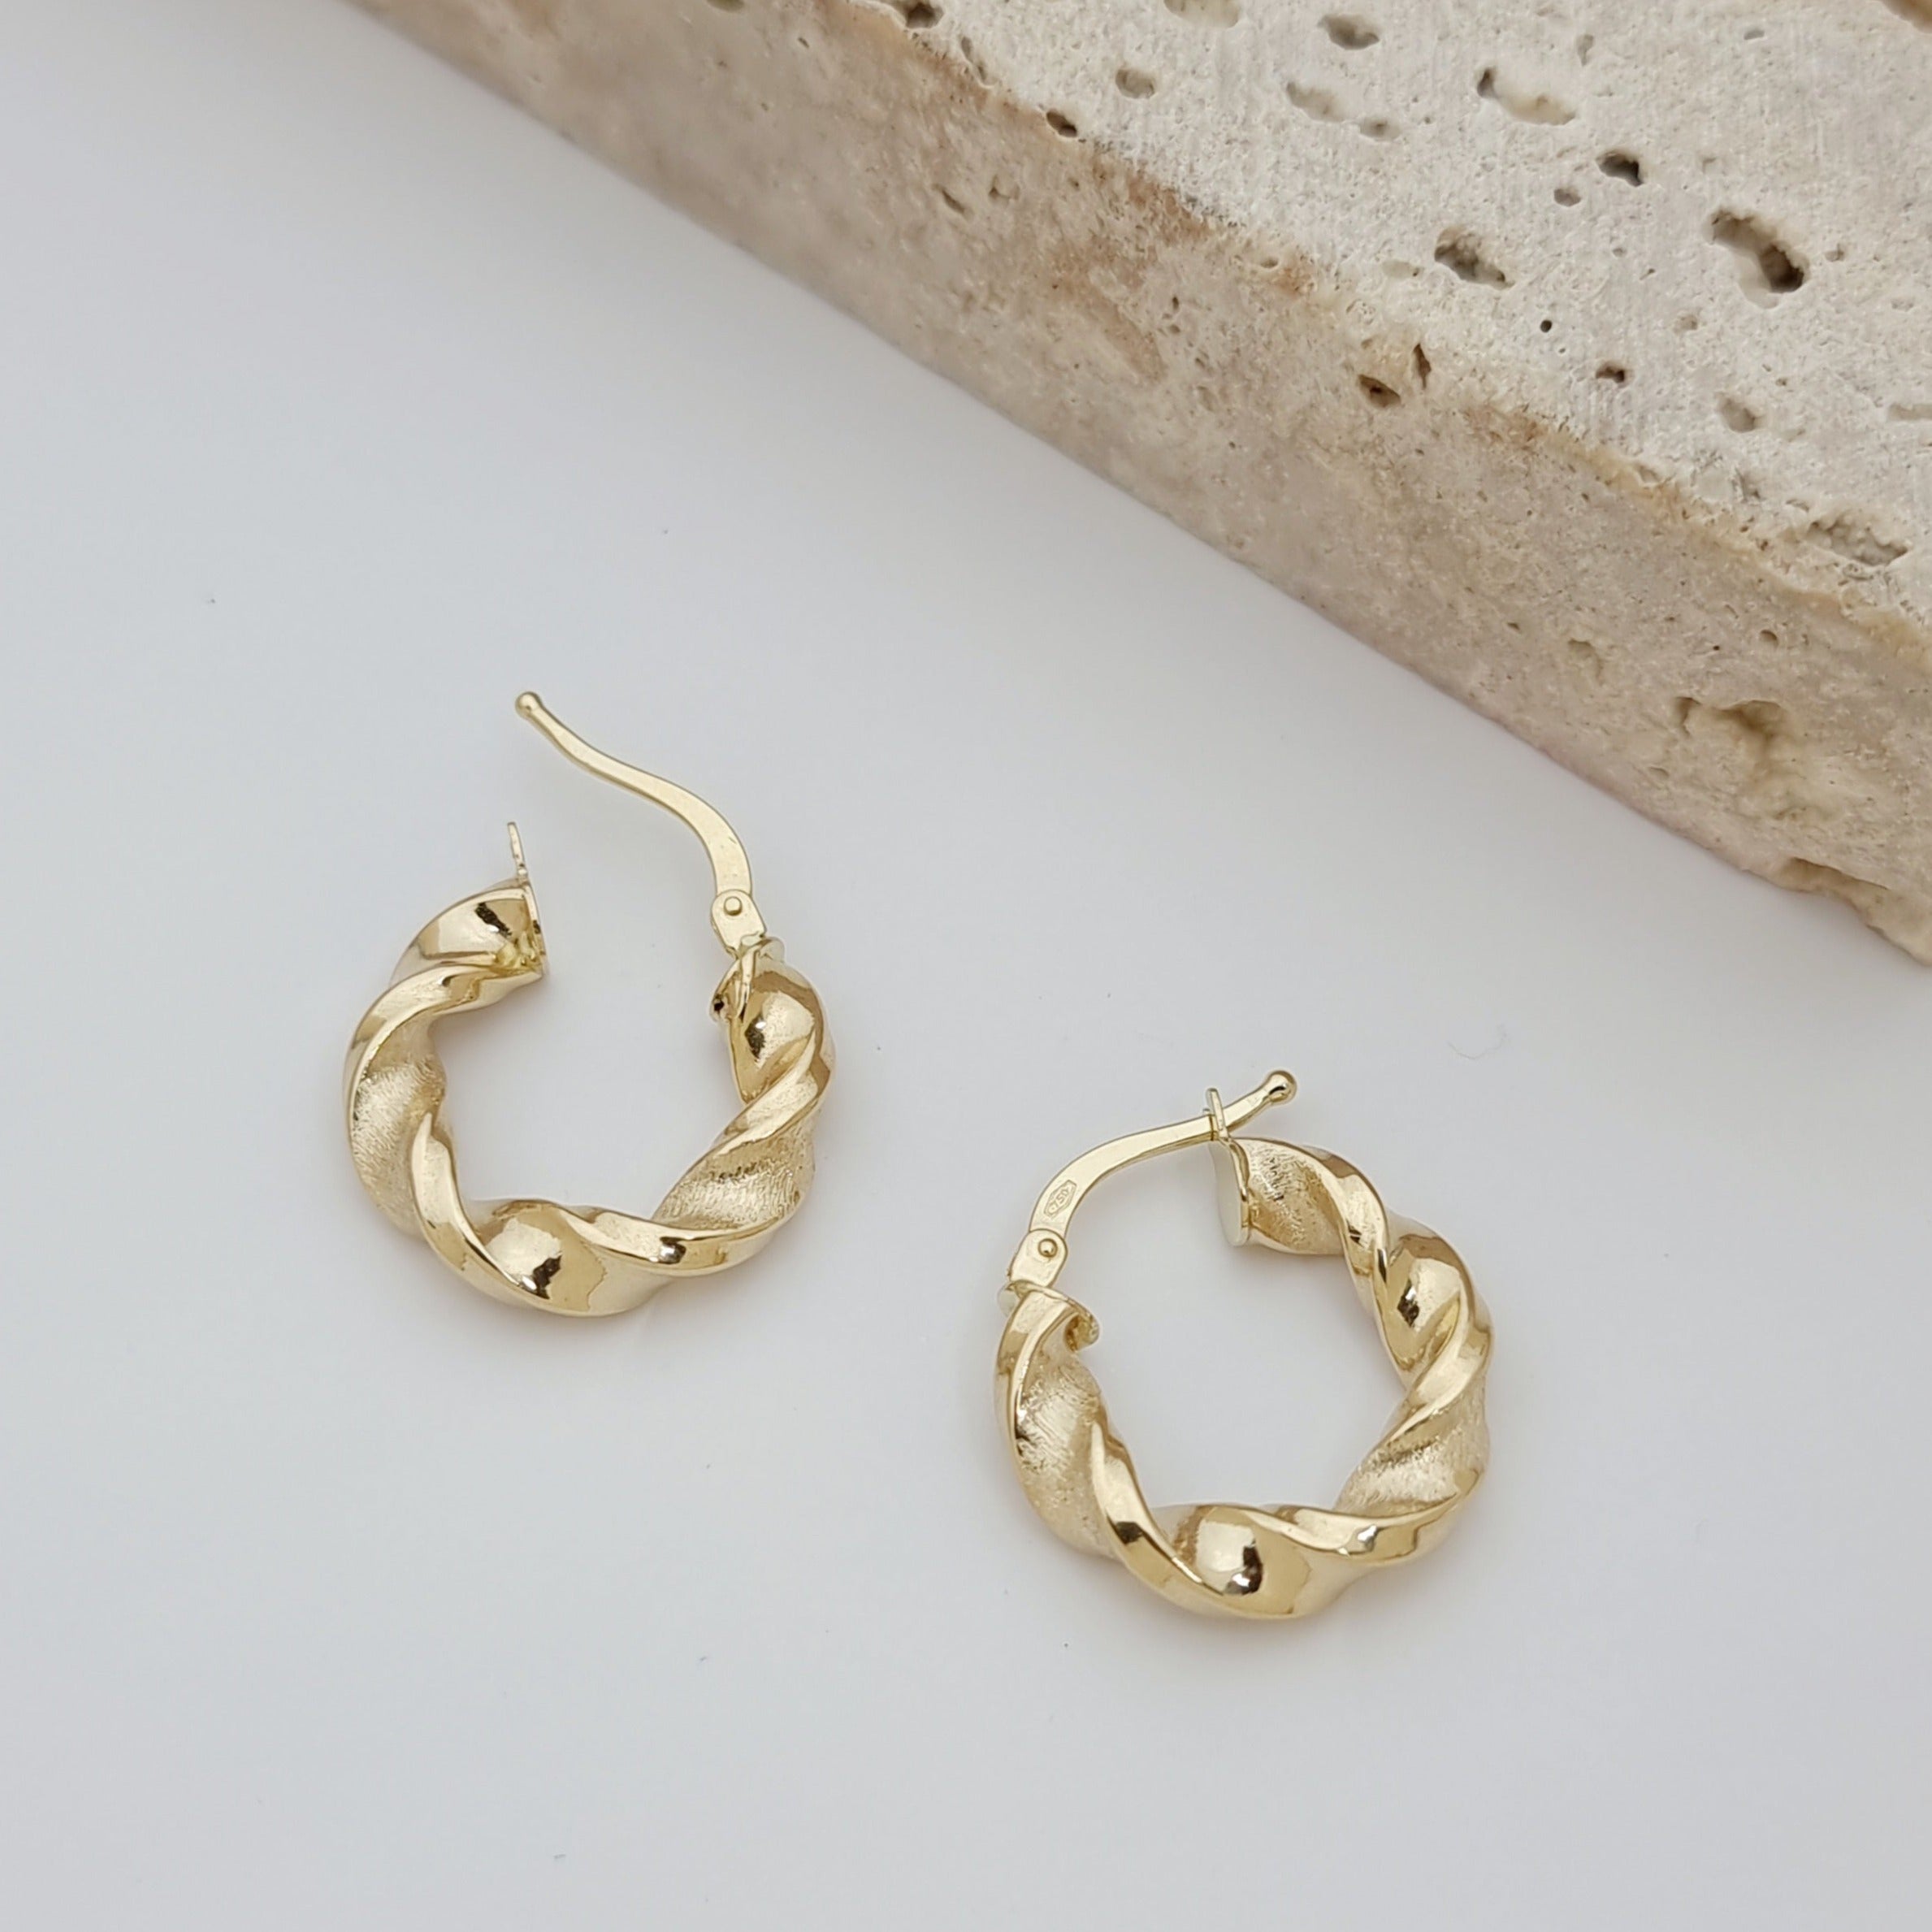 18K Pure Gold Twisted Round Earring Set